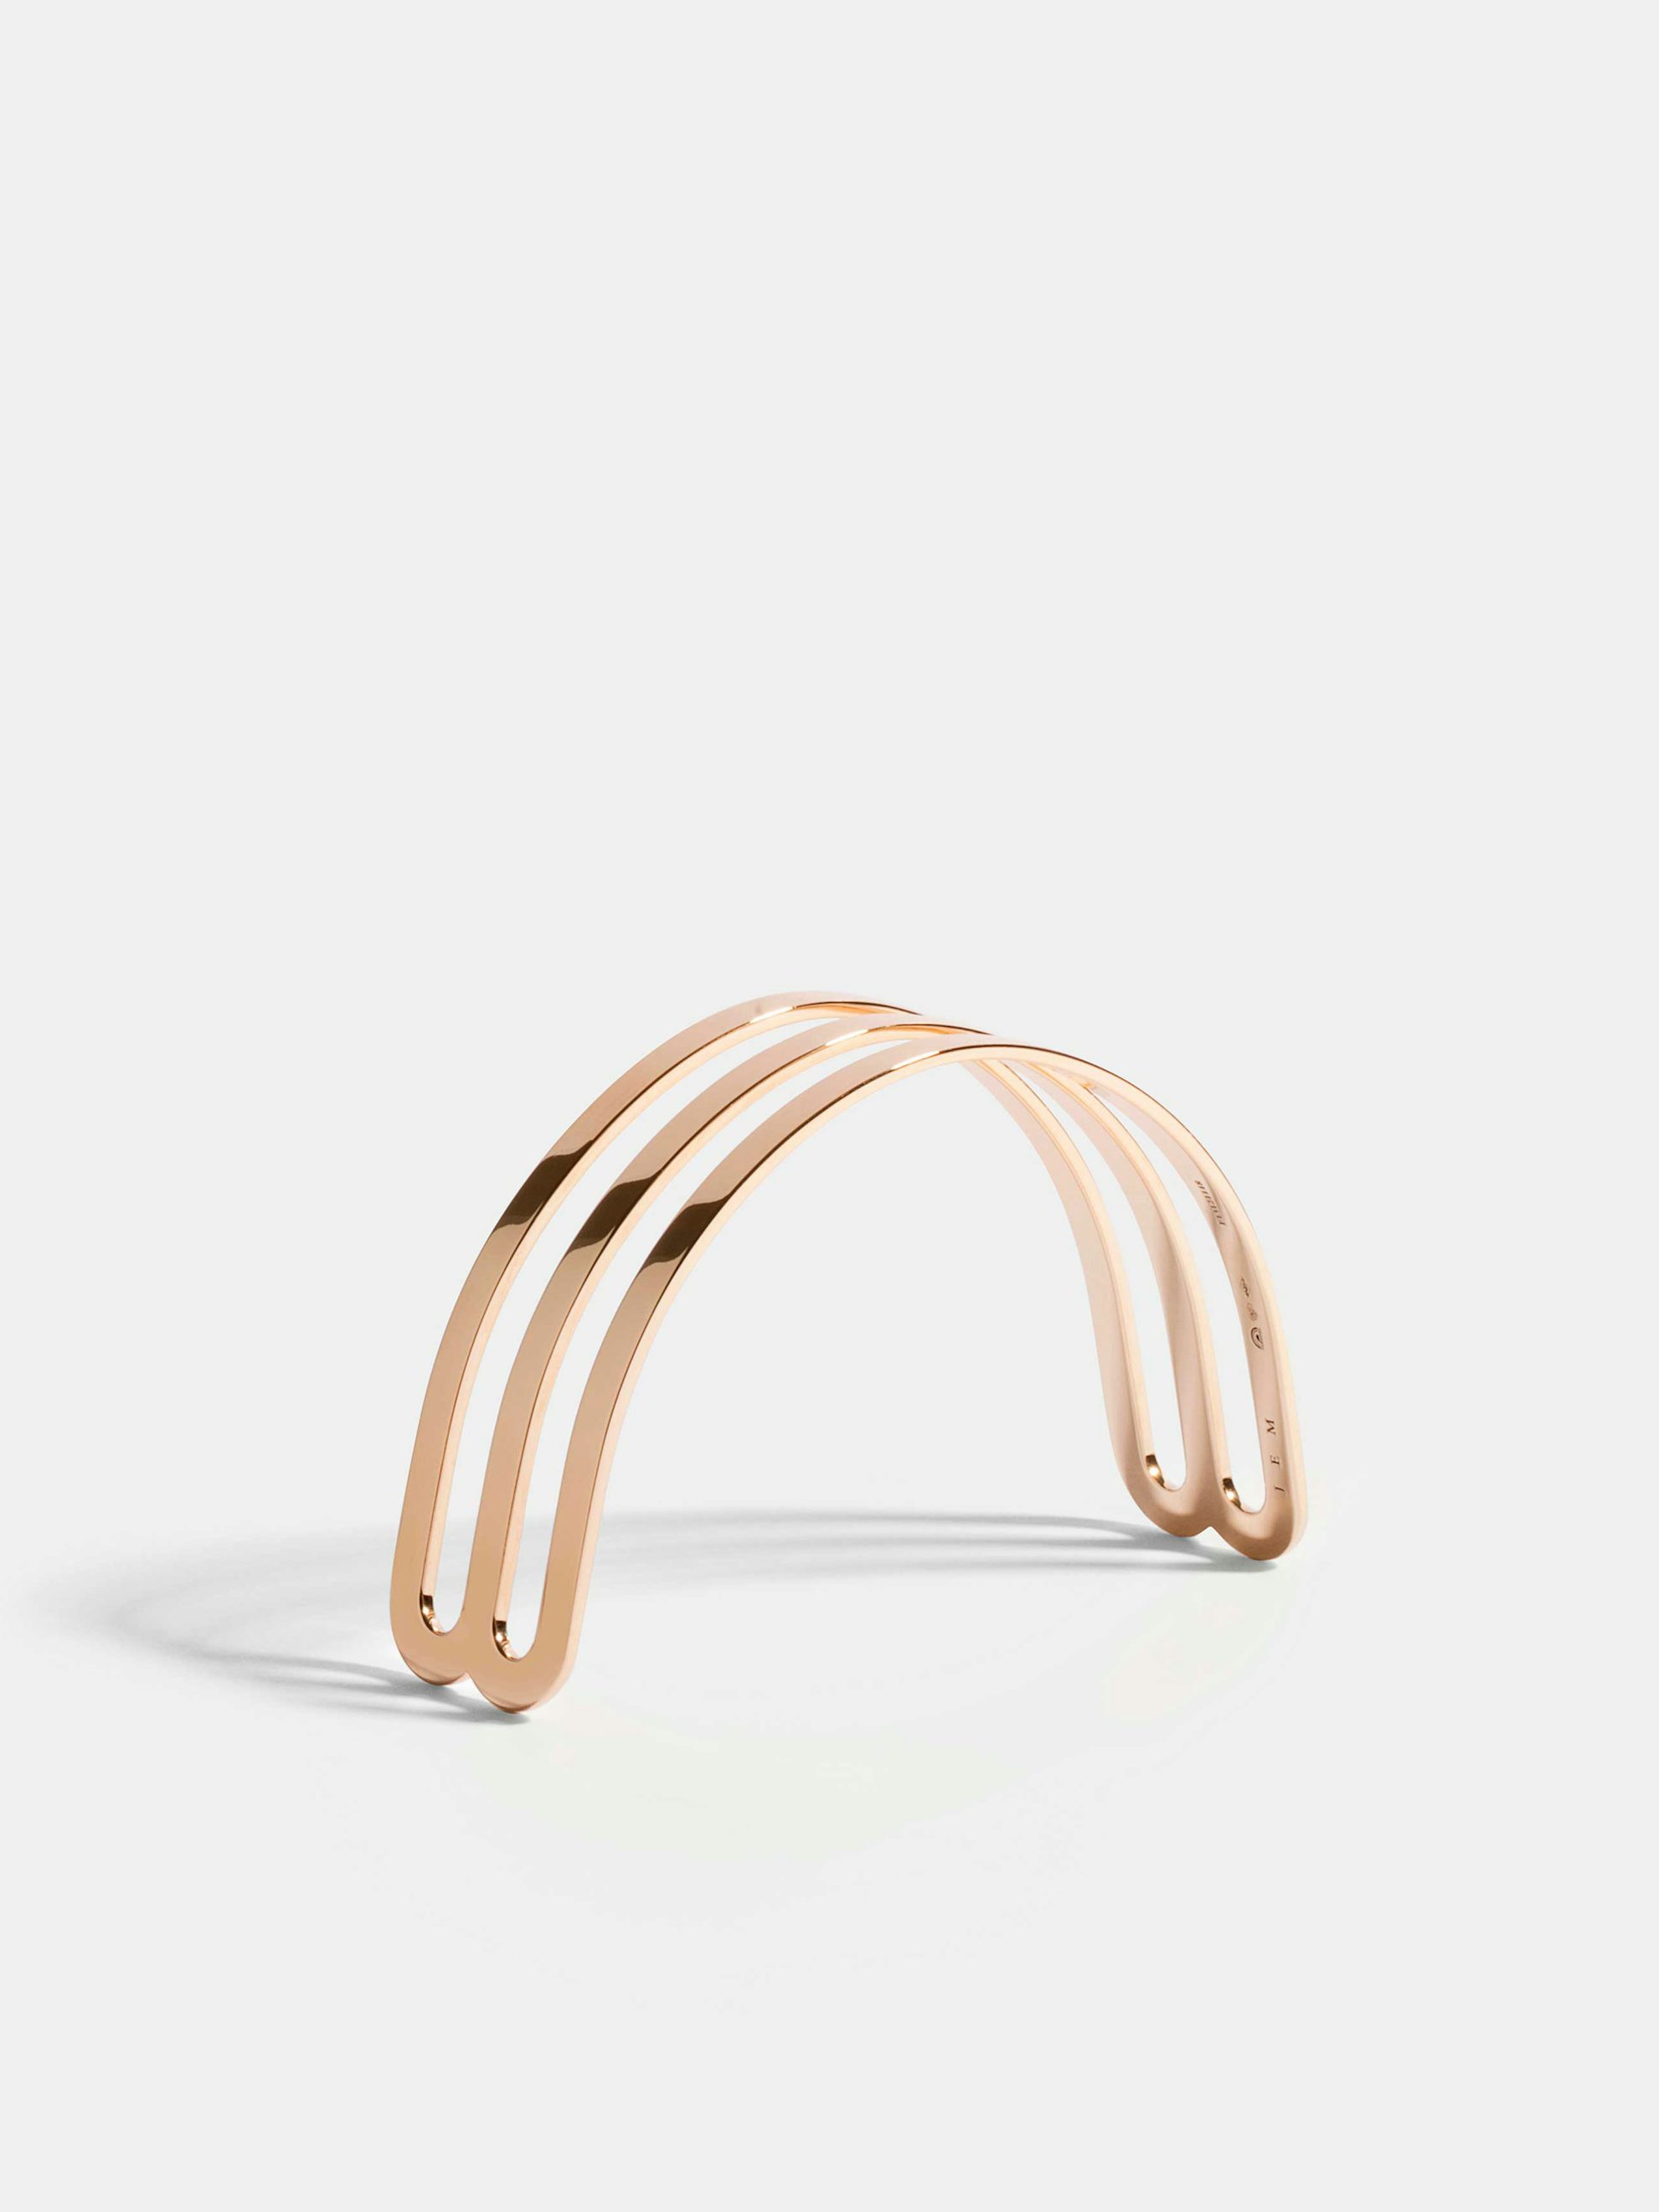 Étreintes double half-bracelet in 18k Fairmined ethical rose gold with a polished finish.